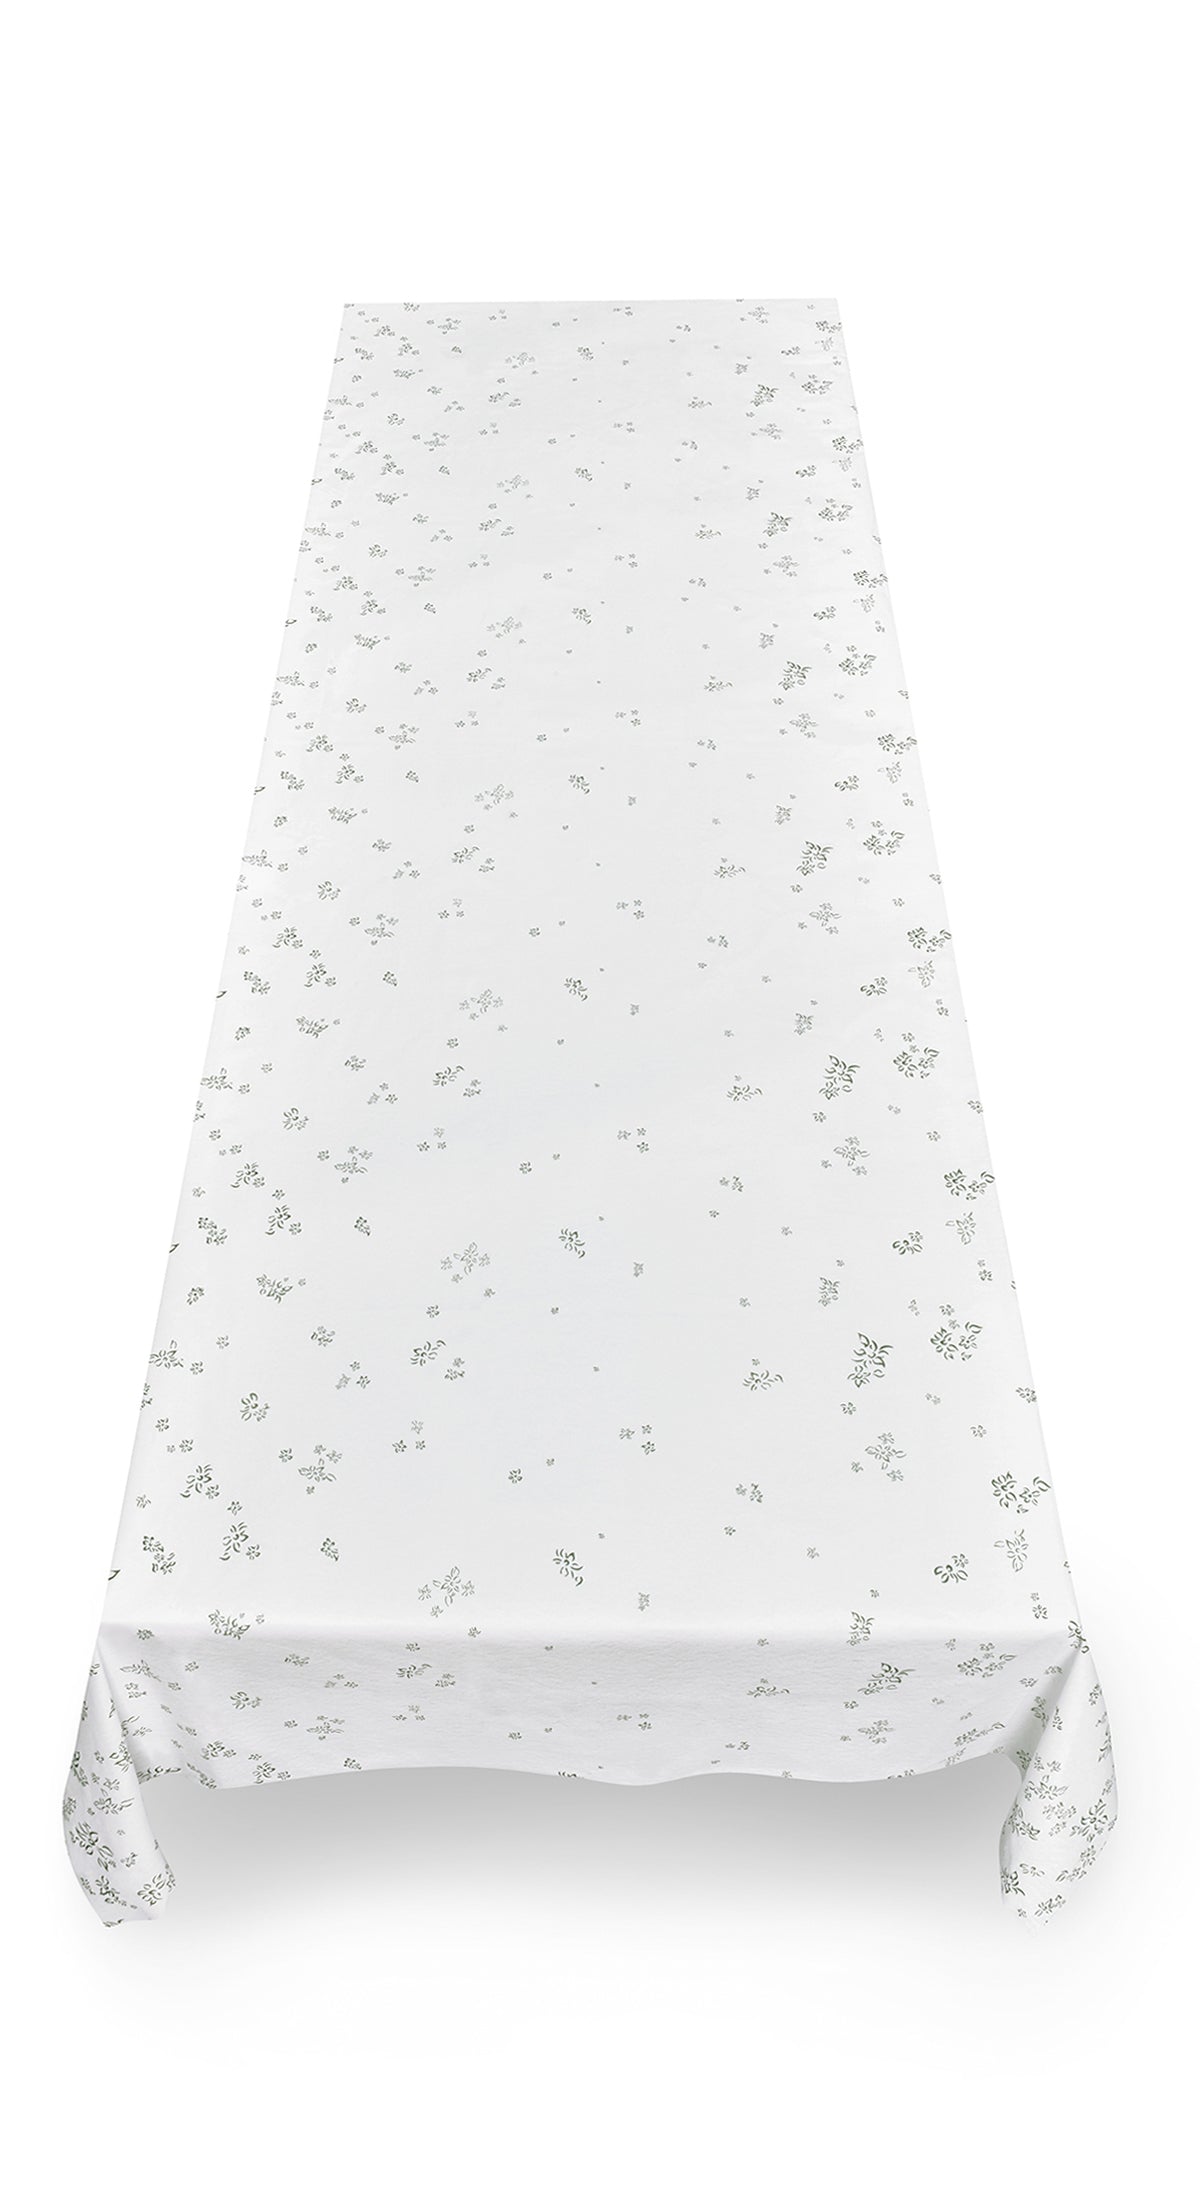 Summerill & Bishop Falling Flower Paper Tablecloth in Avocado Green